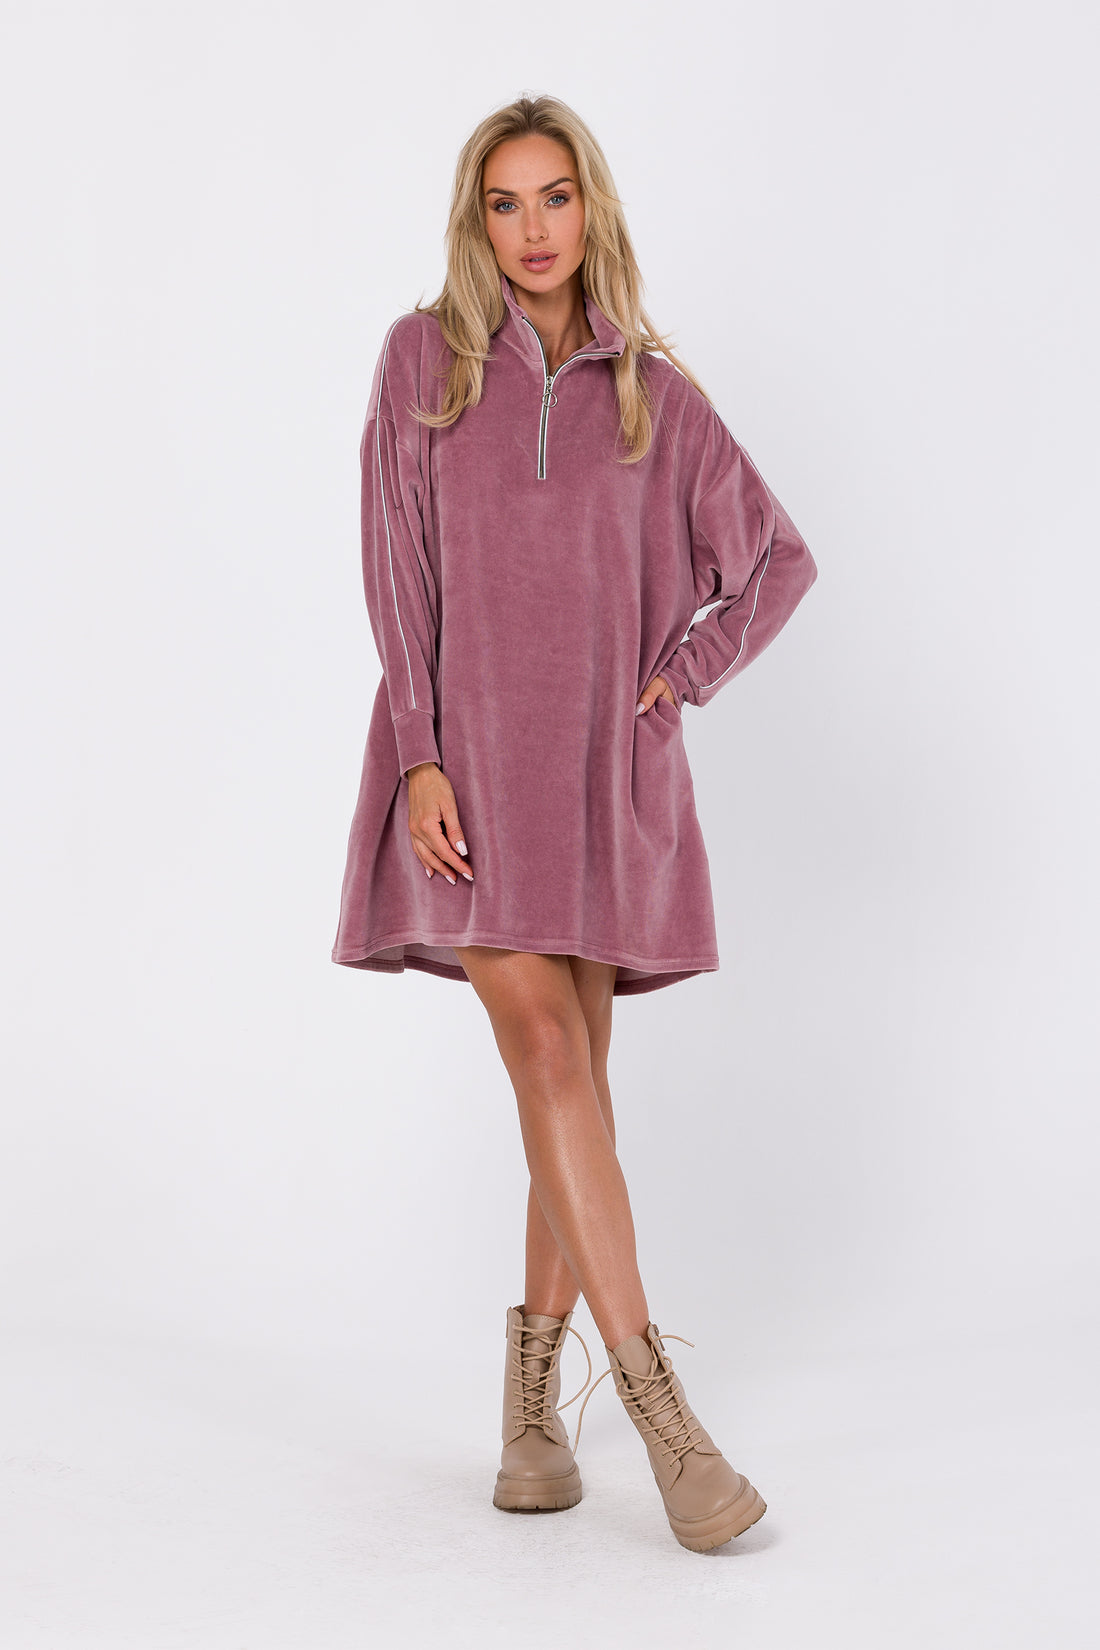 Velvet Edge Dress | Strictly In | Indulge in the allure of our Velvet Edge Dress – an 80% velvet-knit cotton with a zipped high collar, decorative piping, and a high-low hem, this dress is a modern statement in comfort and chic design.